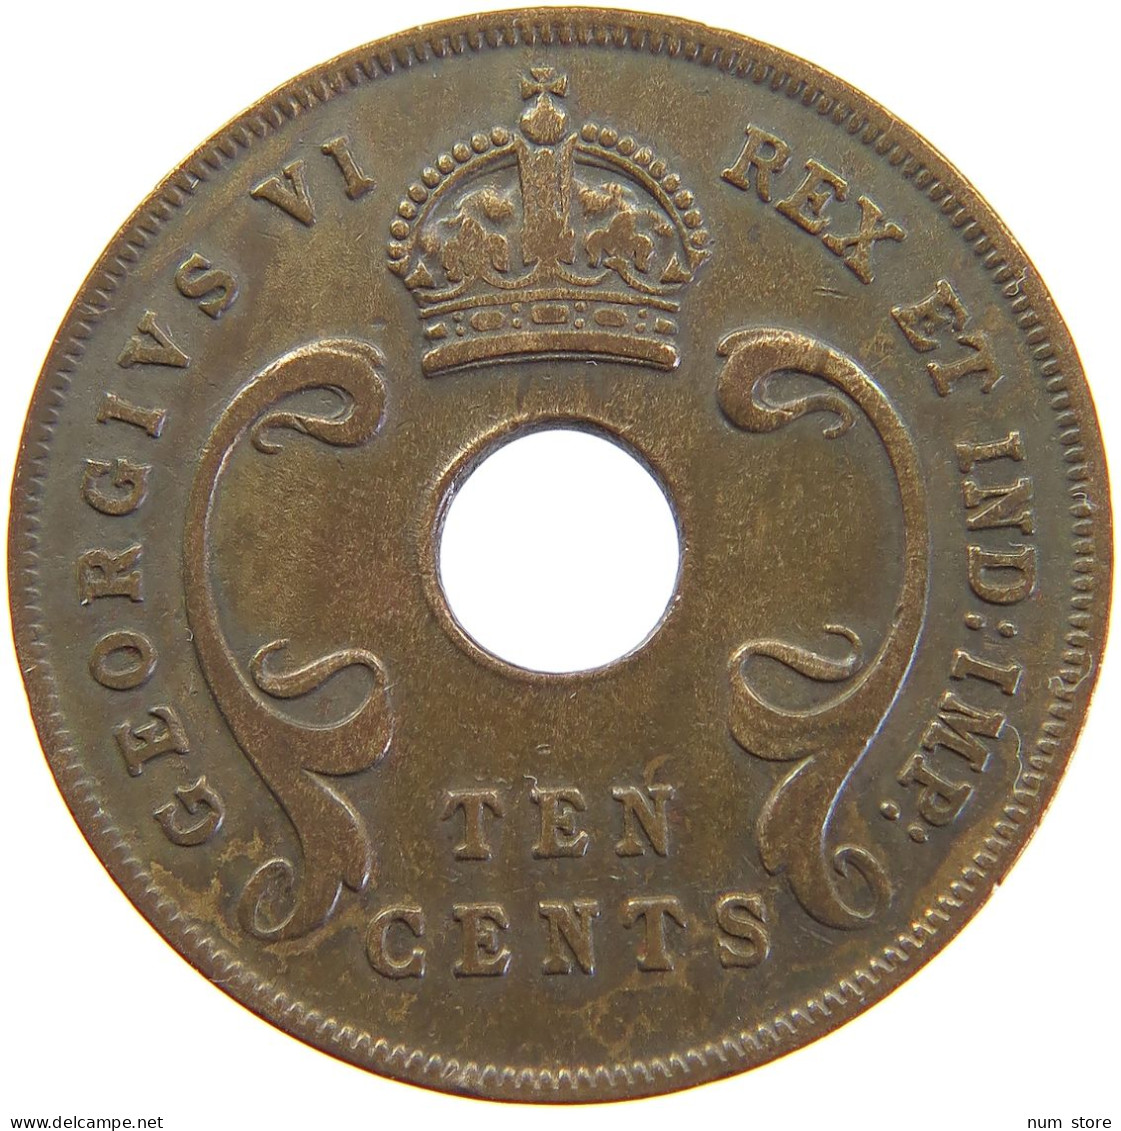 EAST AFRICA 10 CENTS 1941 GEORGE V. (1910-1936) #MA 067723 - Britische Kolonie